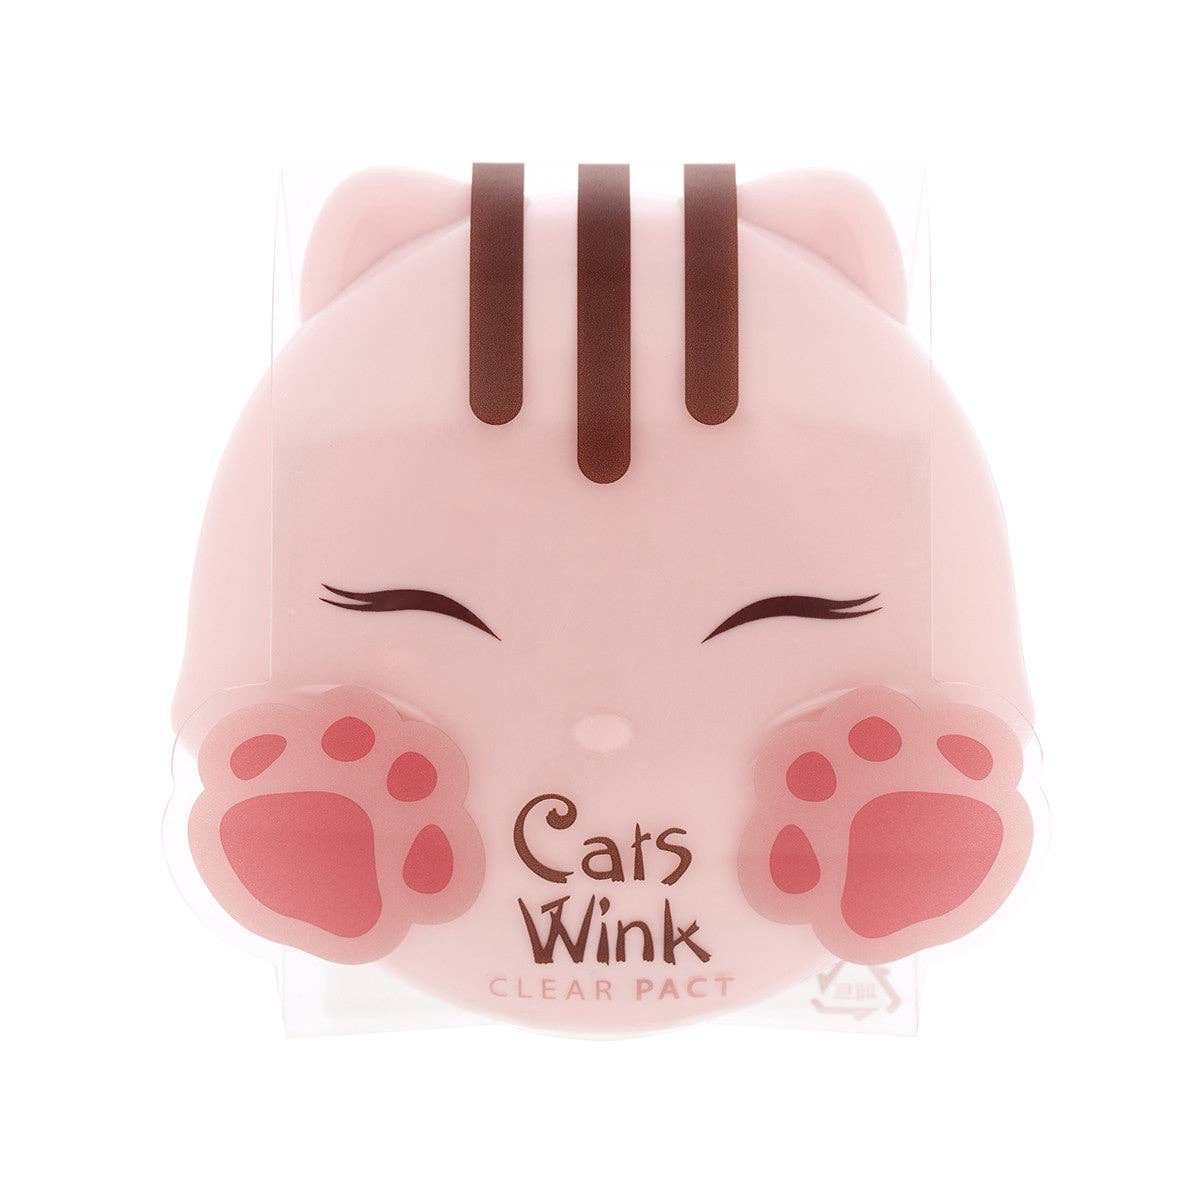 TONYMOLY Cat's Wink Clear Pact Kawaii Gifts 8806358560904